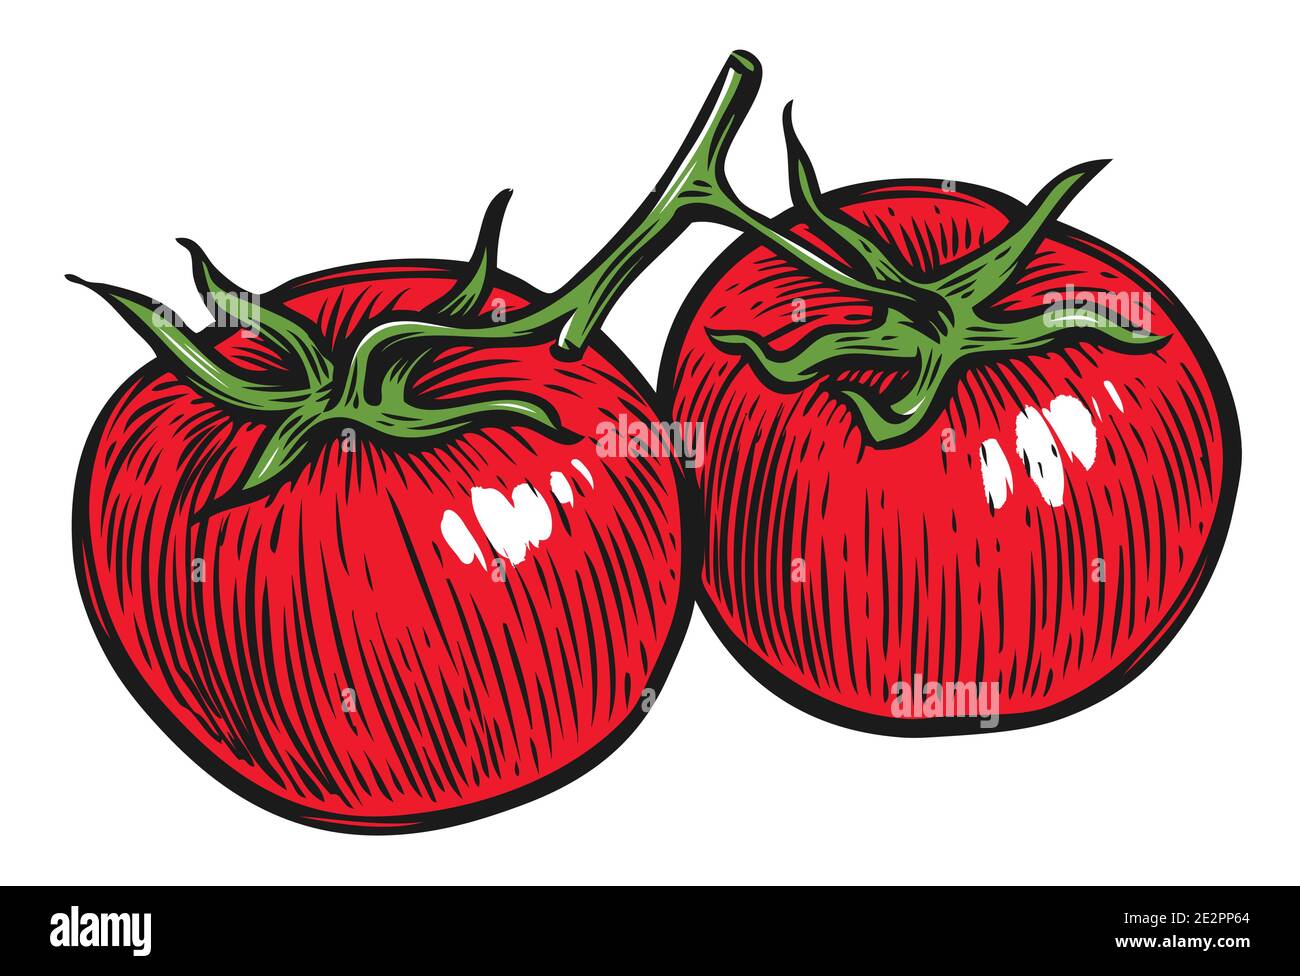 Two tomatoes on a branch. Vegetables vector illustration Stock Vector